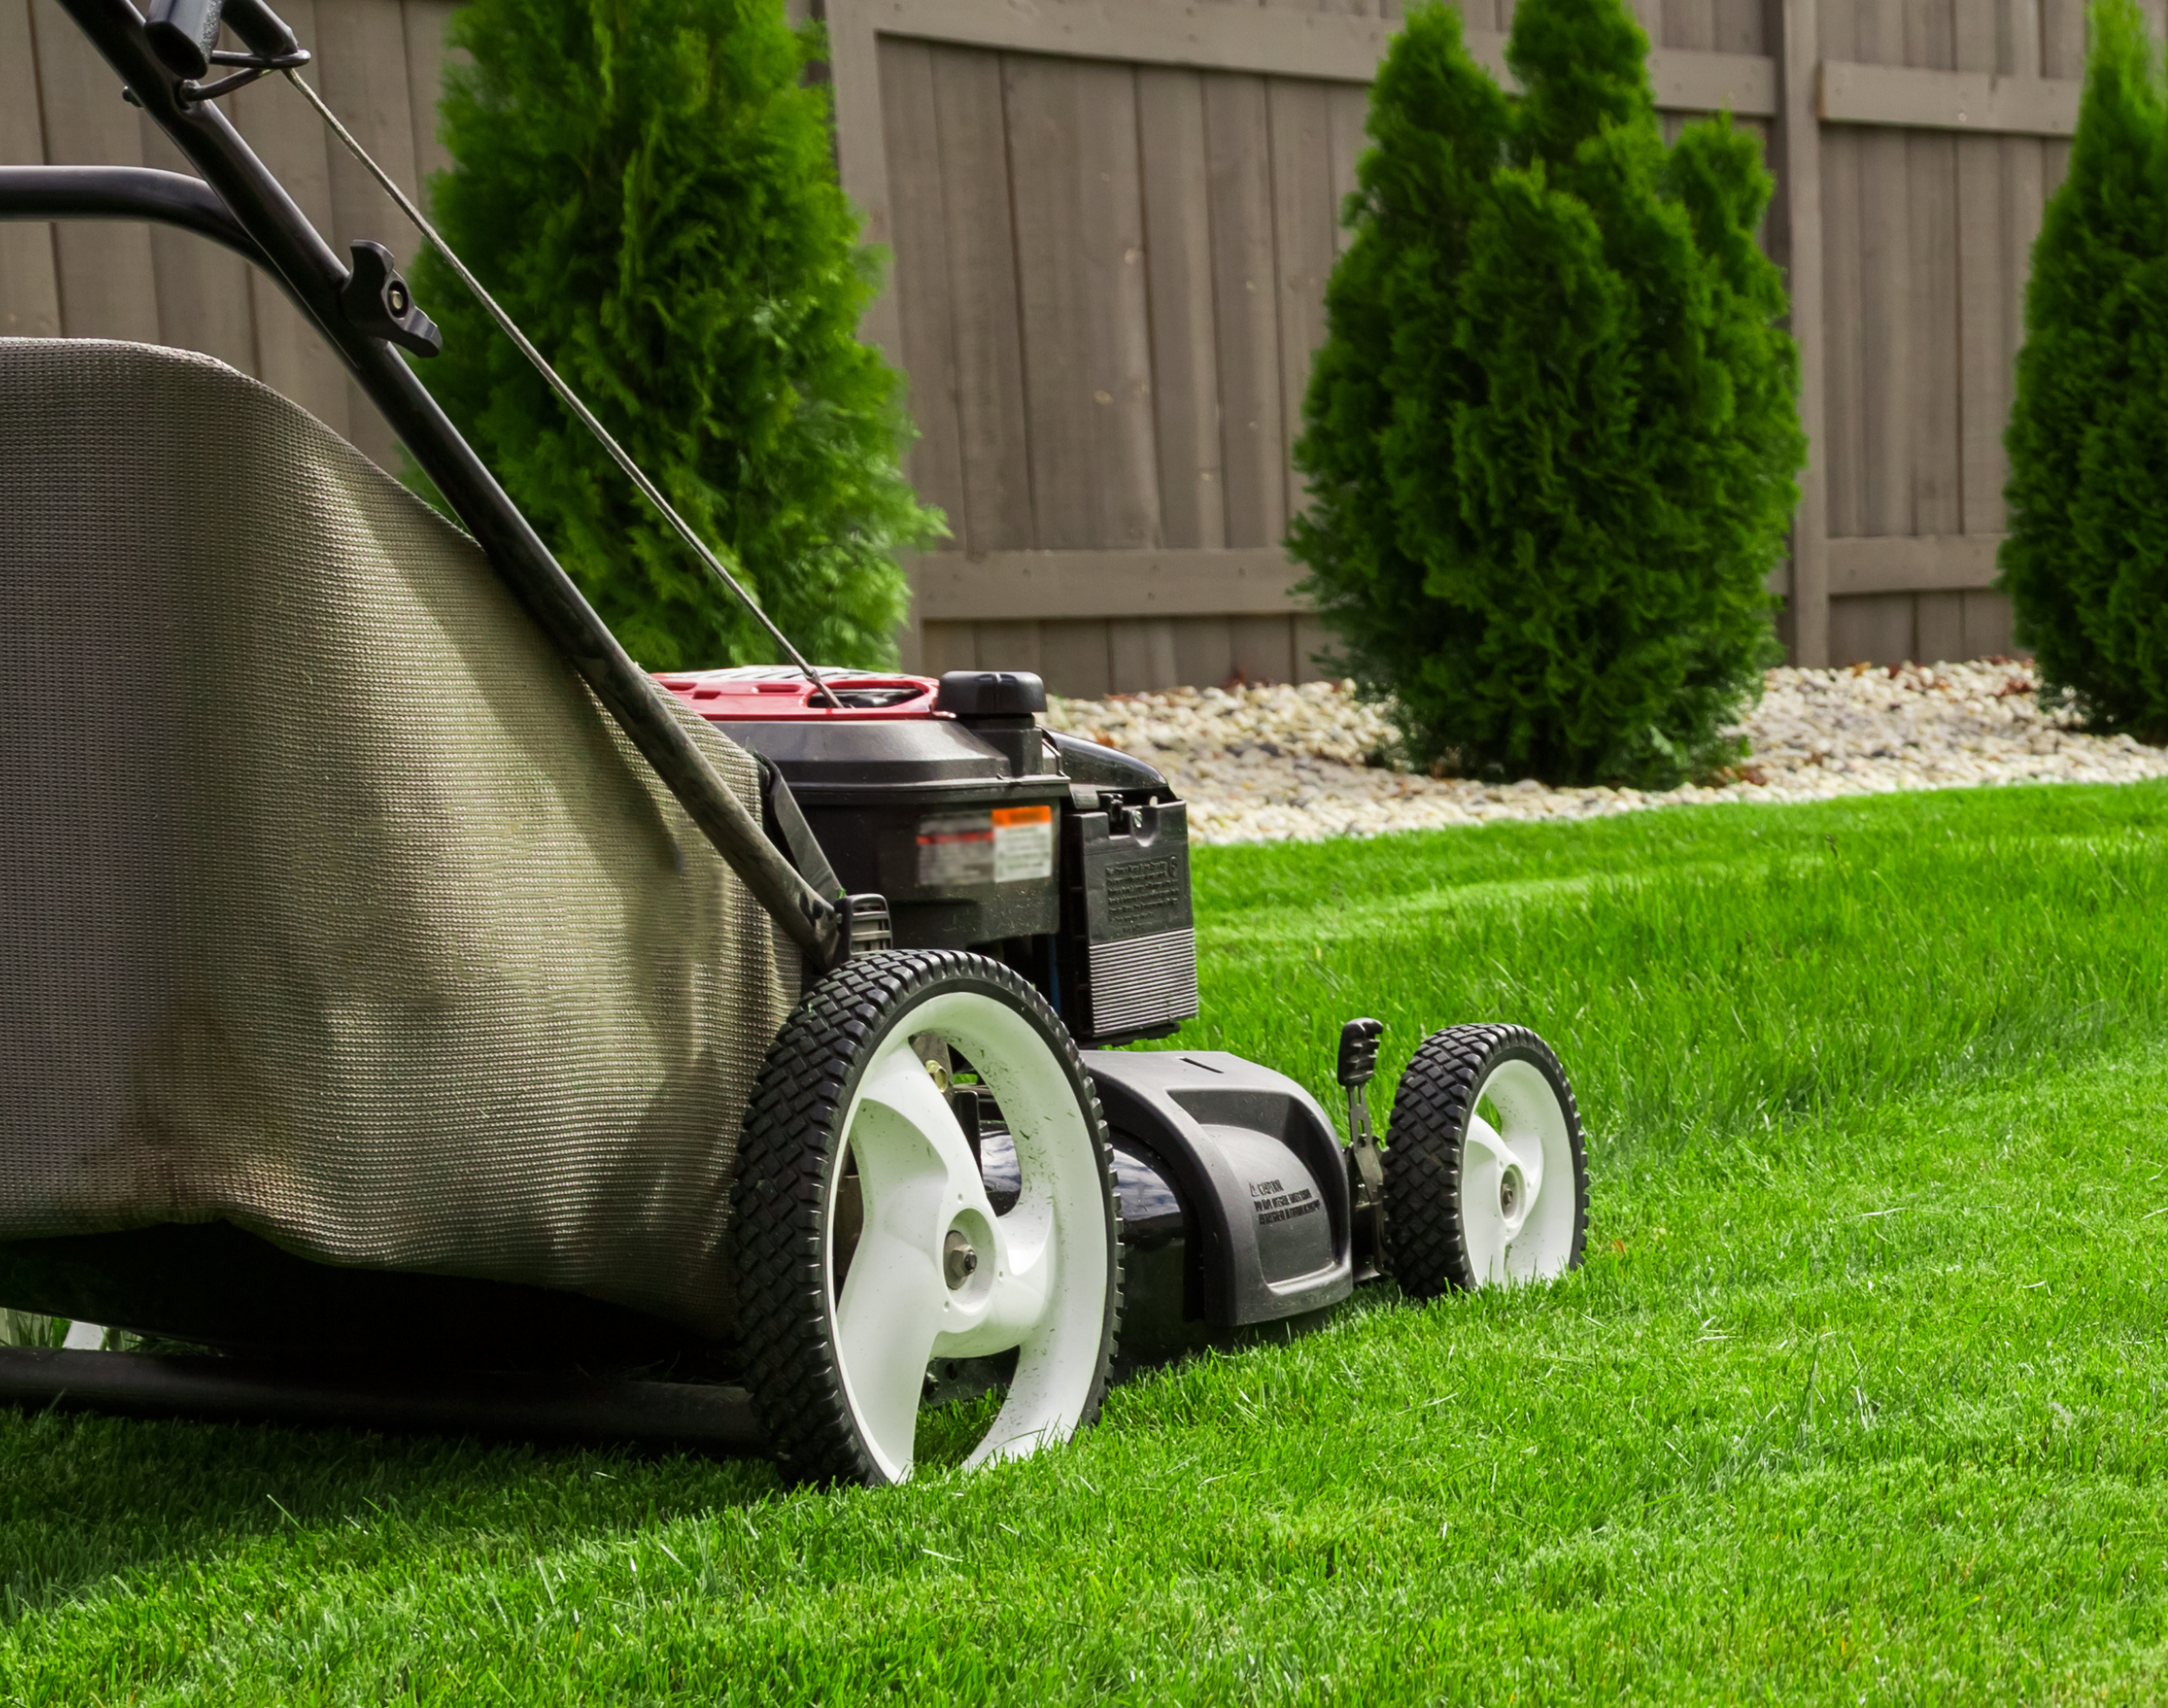 a lawnmower on the grass